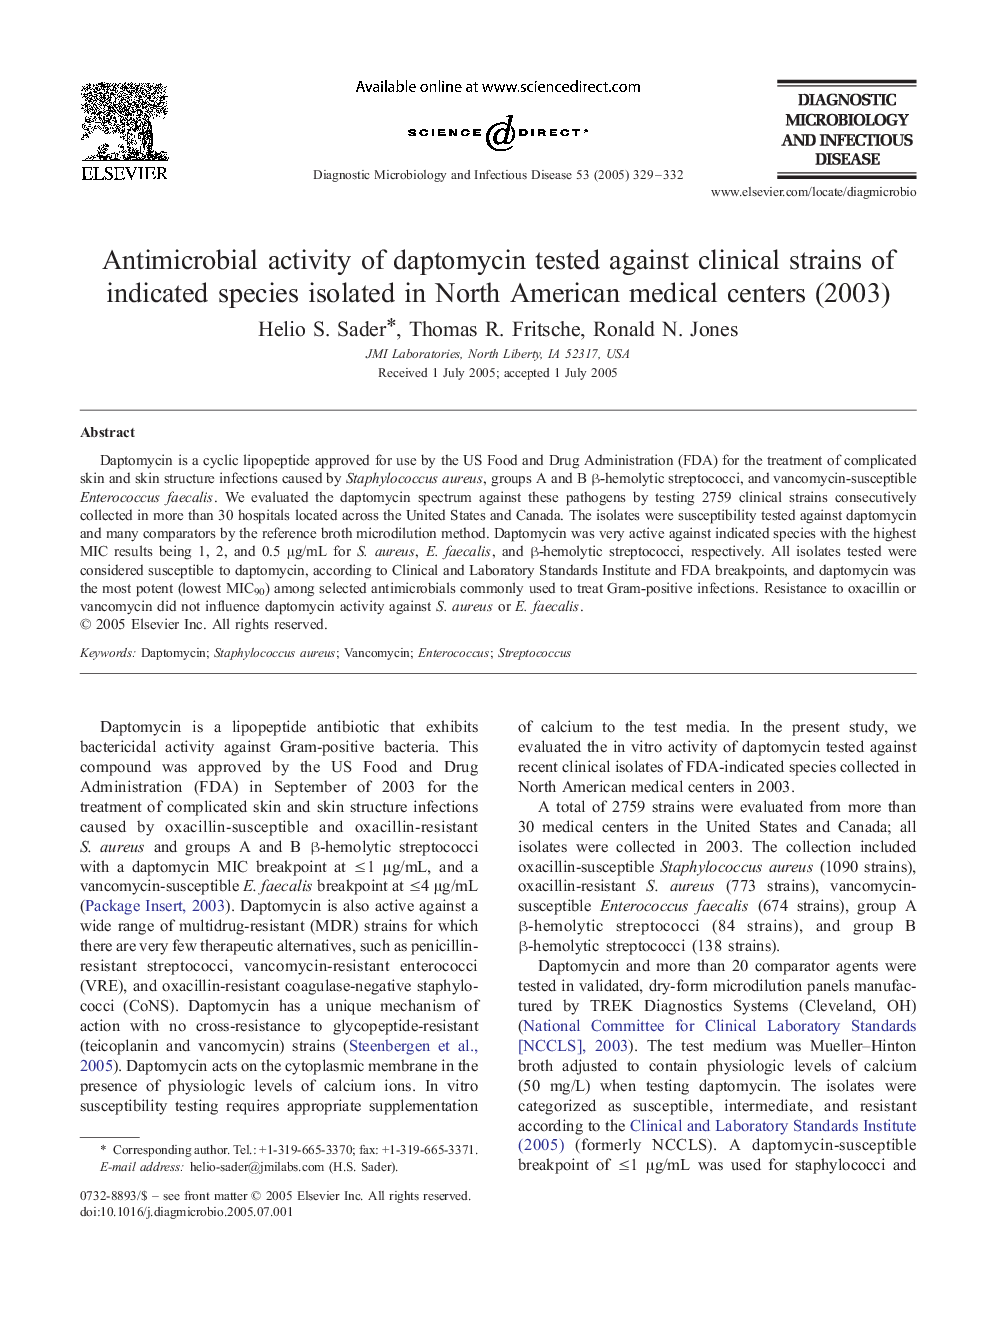 Antimicrobial activity of daptomycin tested against clinical strains of indicated species isolated in North American medical centers (2003)